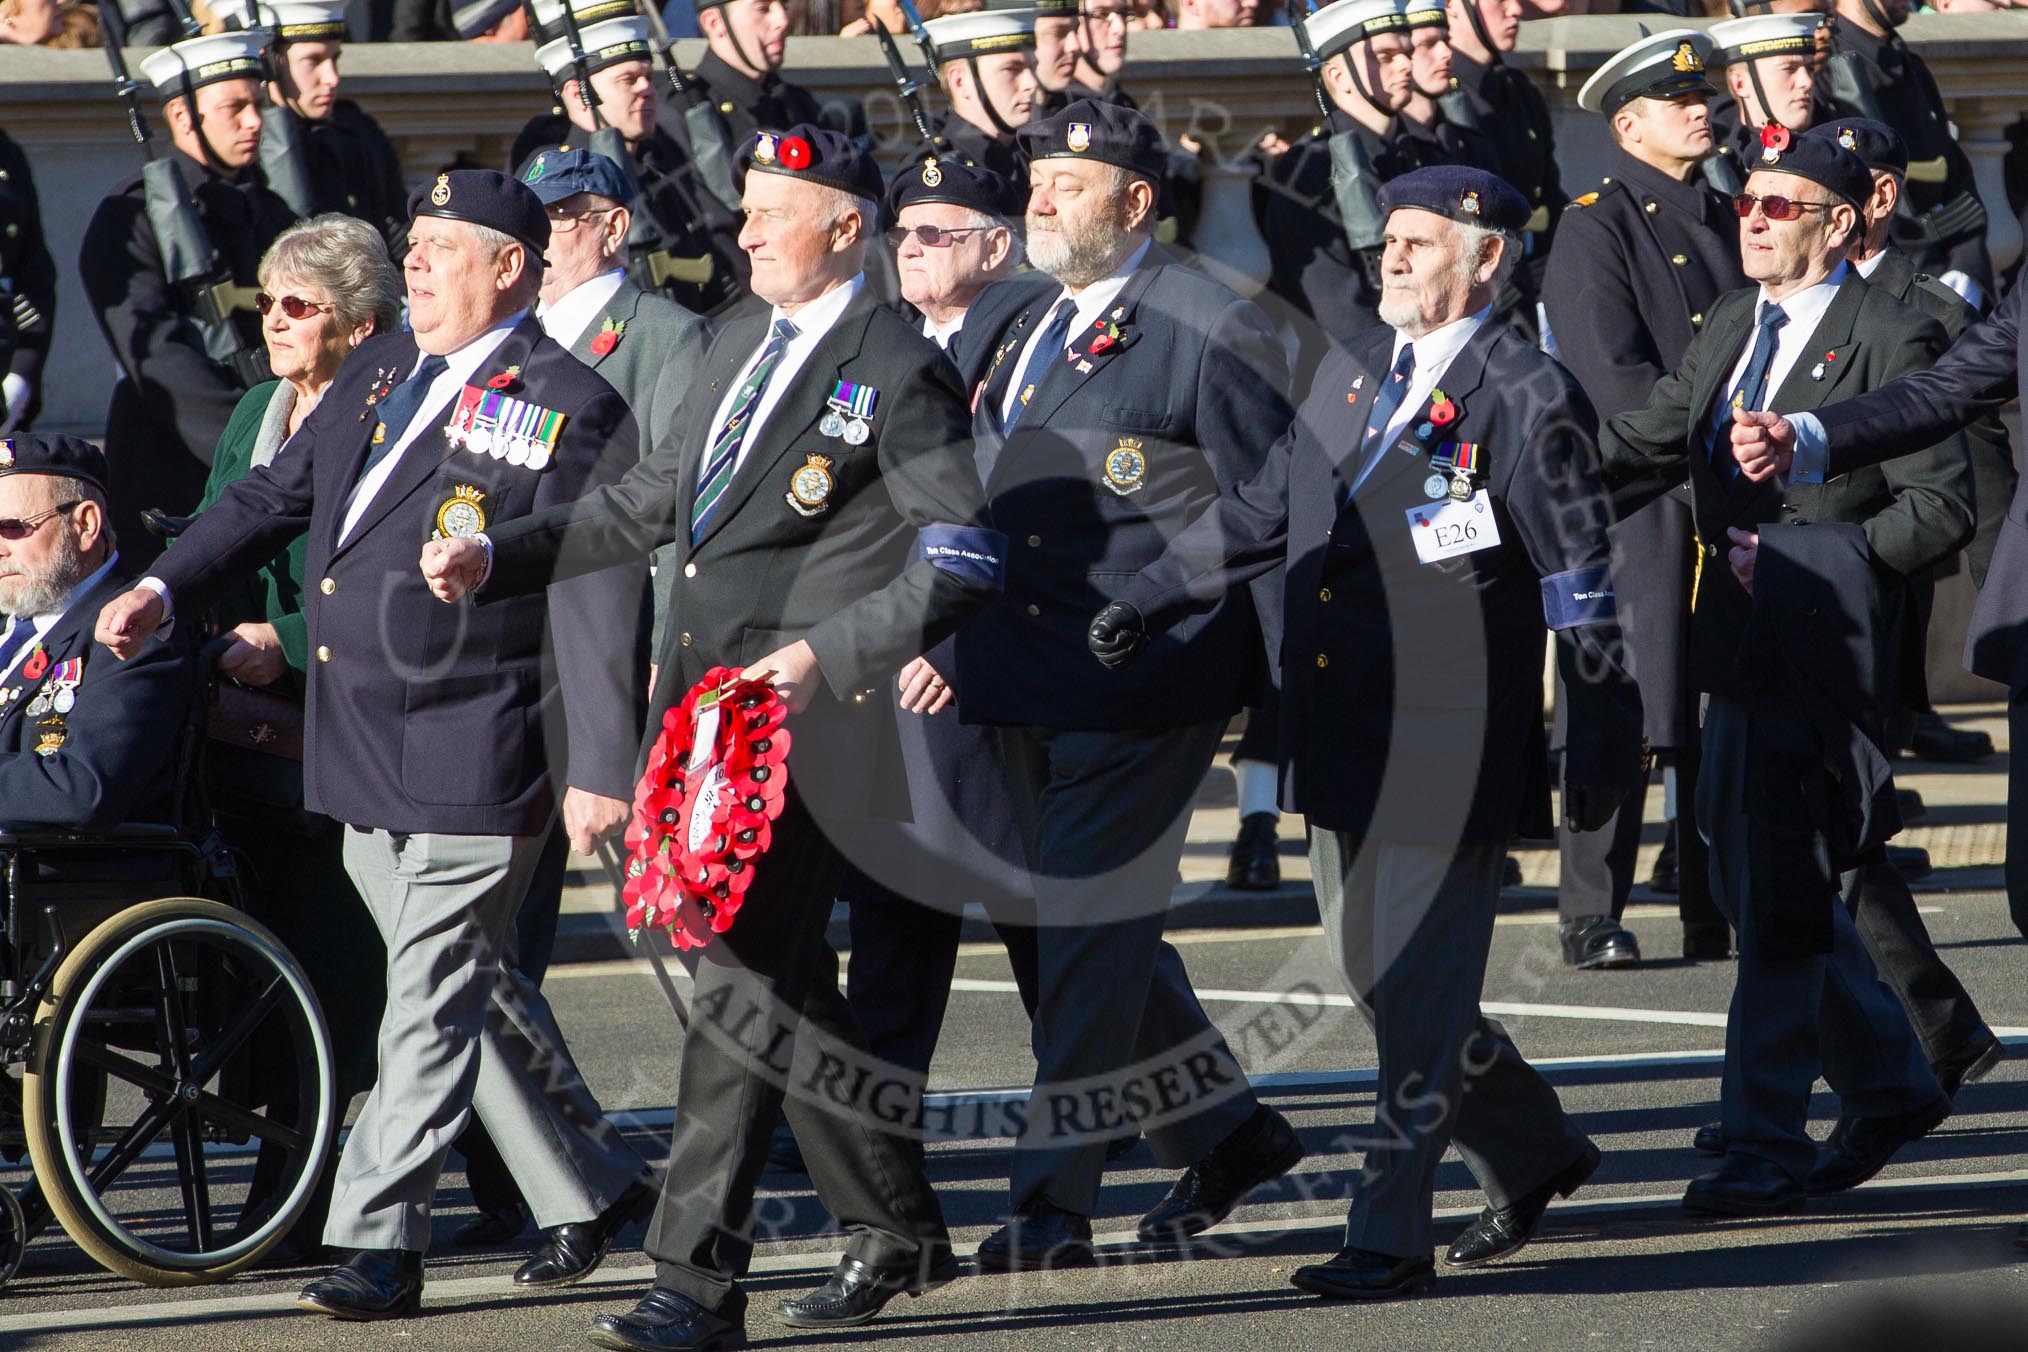 Remembrance Sunday 2012 Cenotaph March Past: Group E26 - Ton Class Association..
Whitehall, Cenotaph,
London SW1,

United Kingdom,
on 11 November 2012 at 11:41, image #186